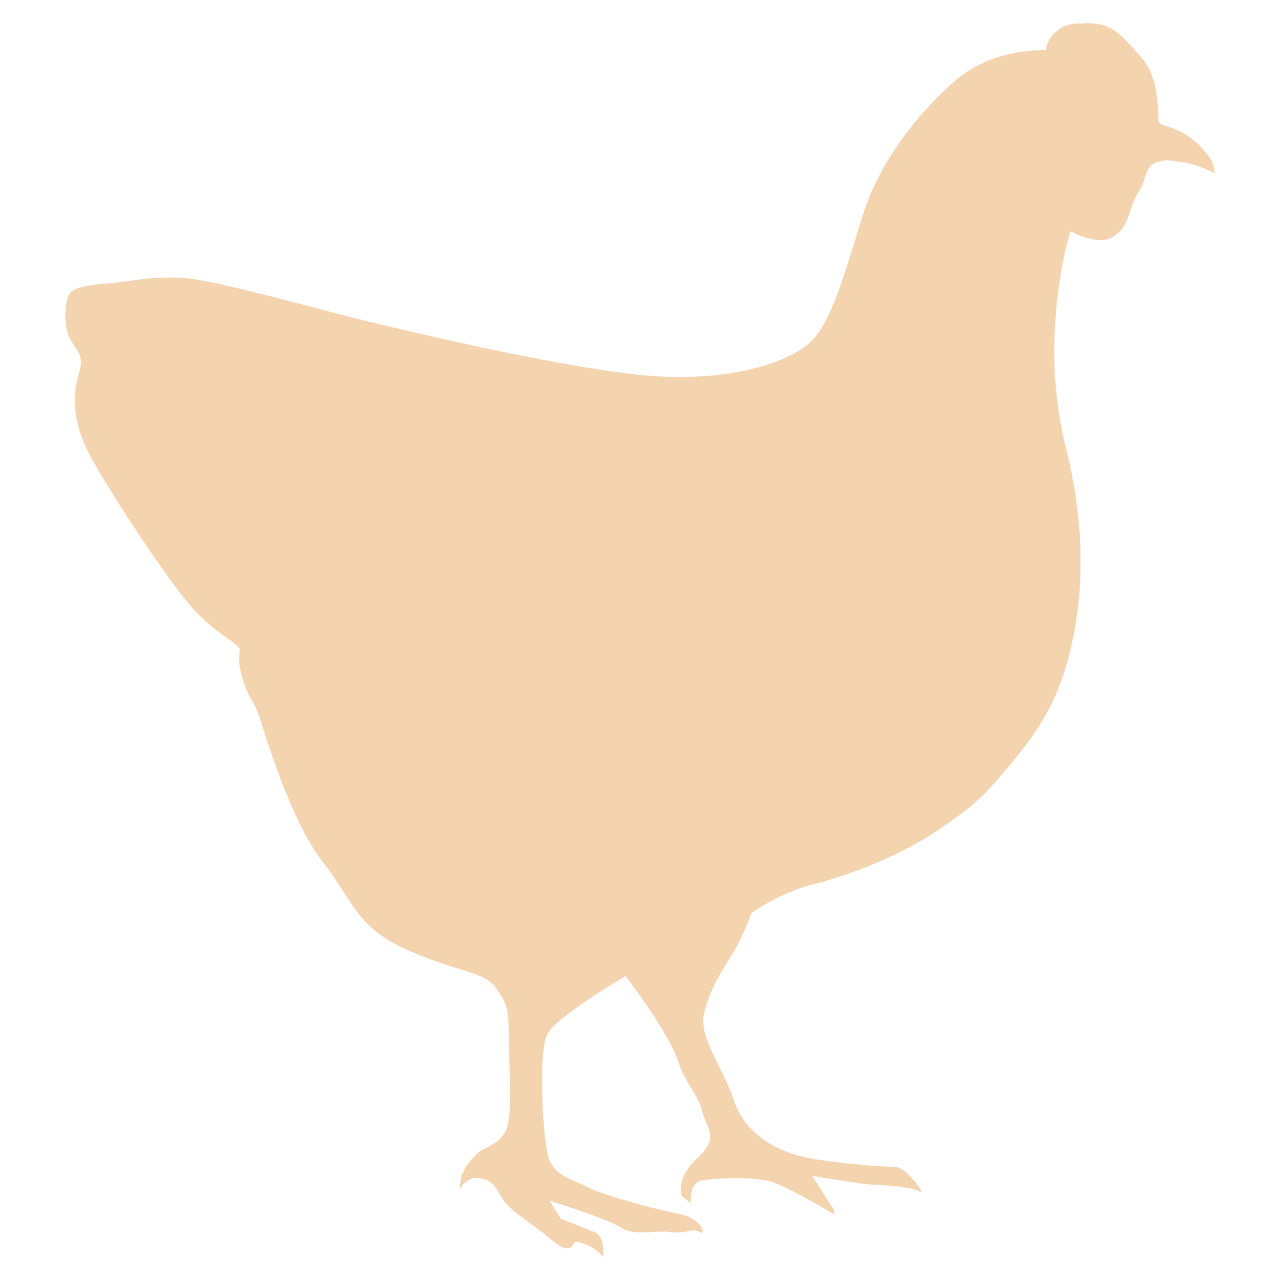 Poultry: Moderate risk